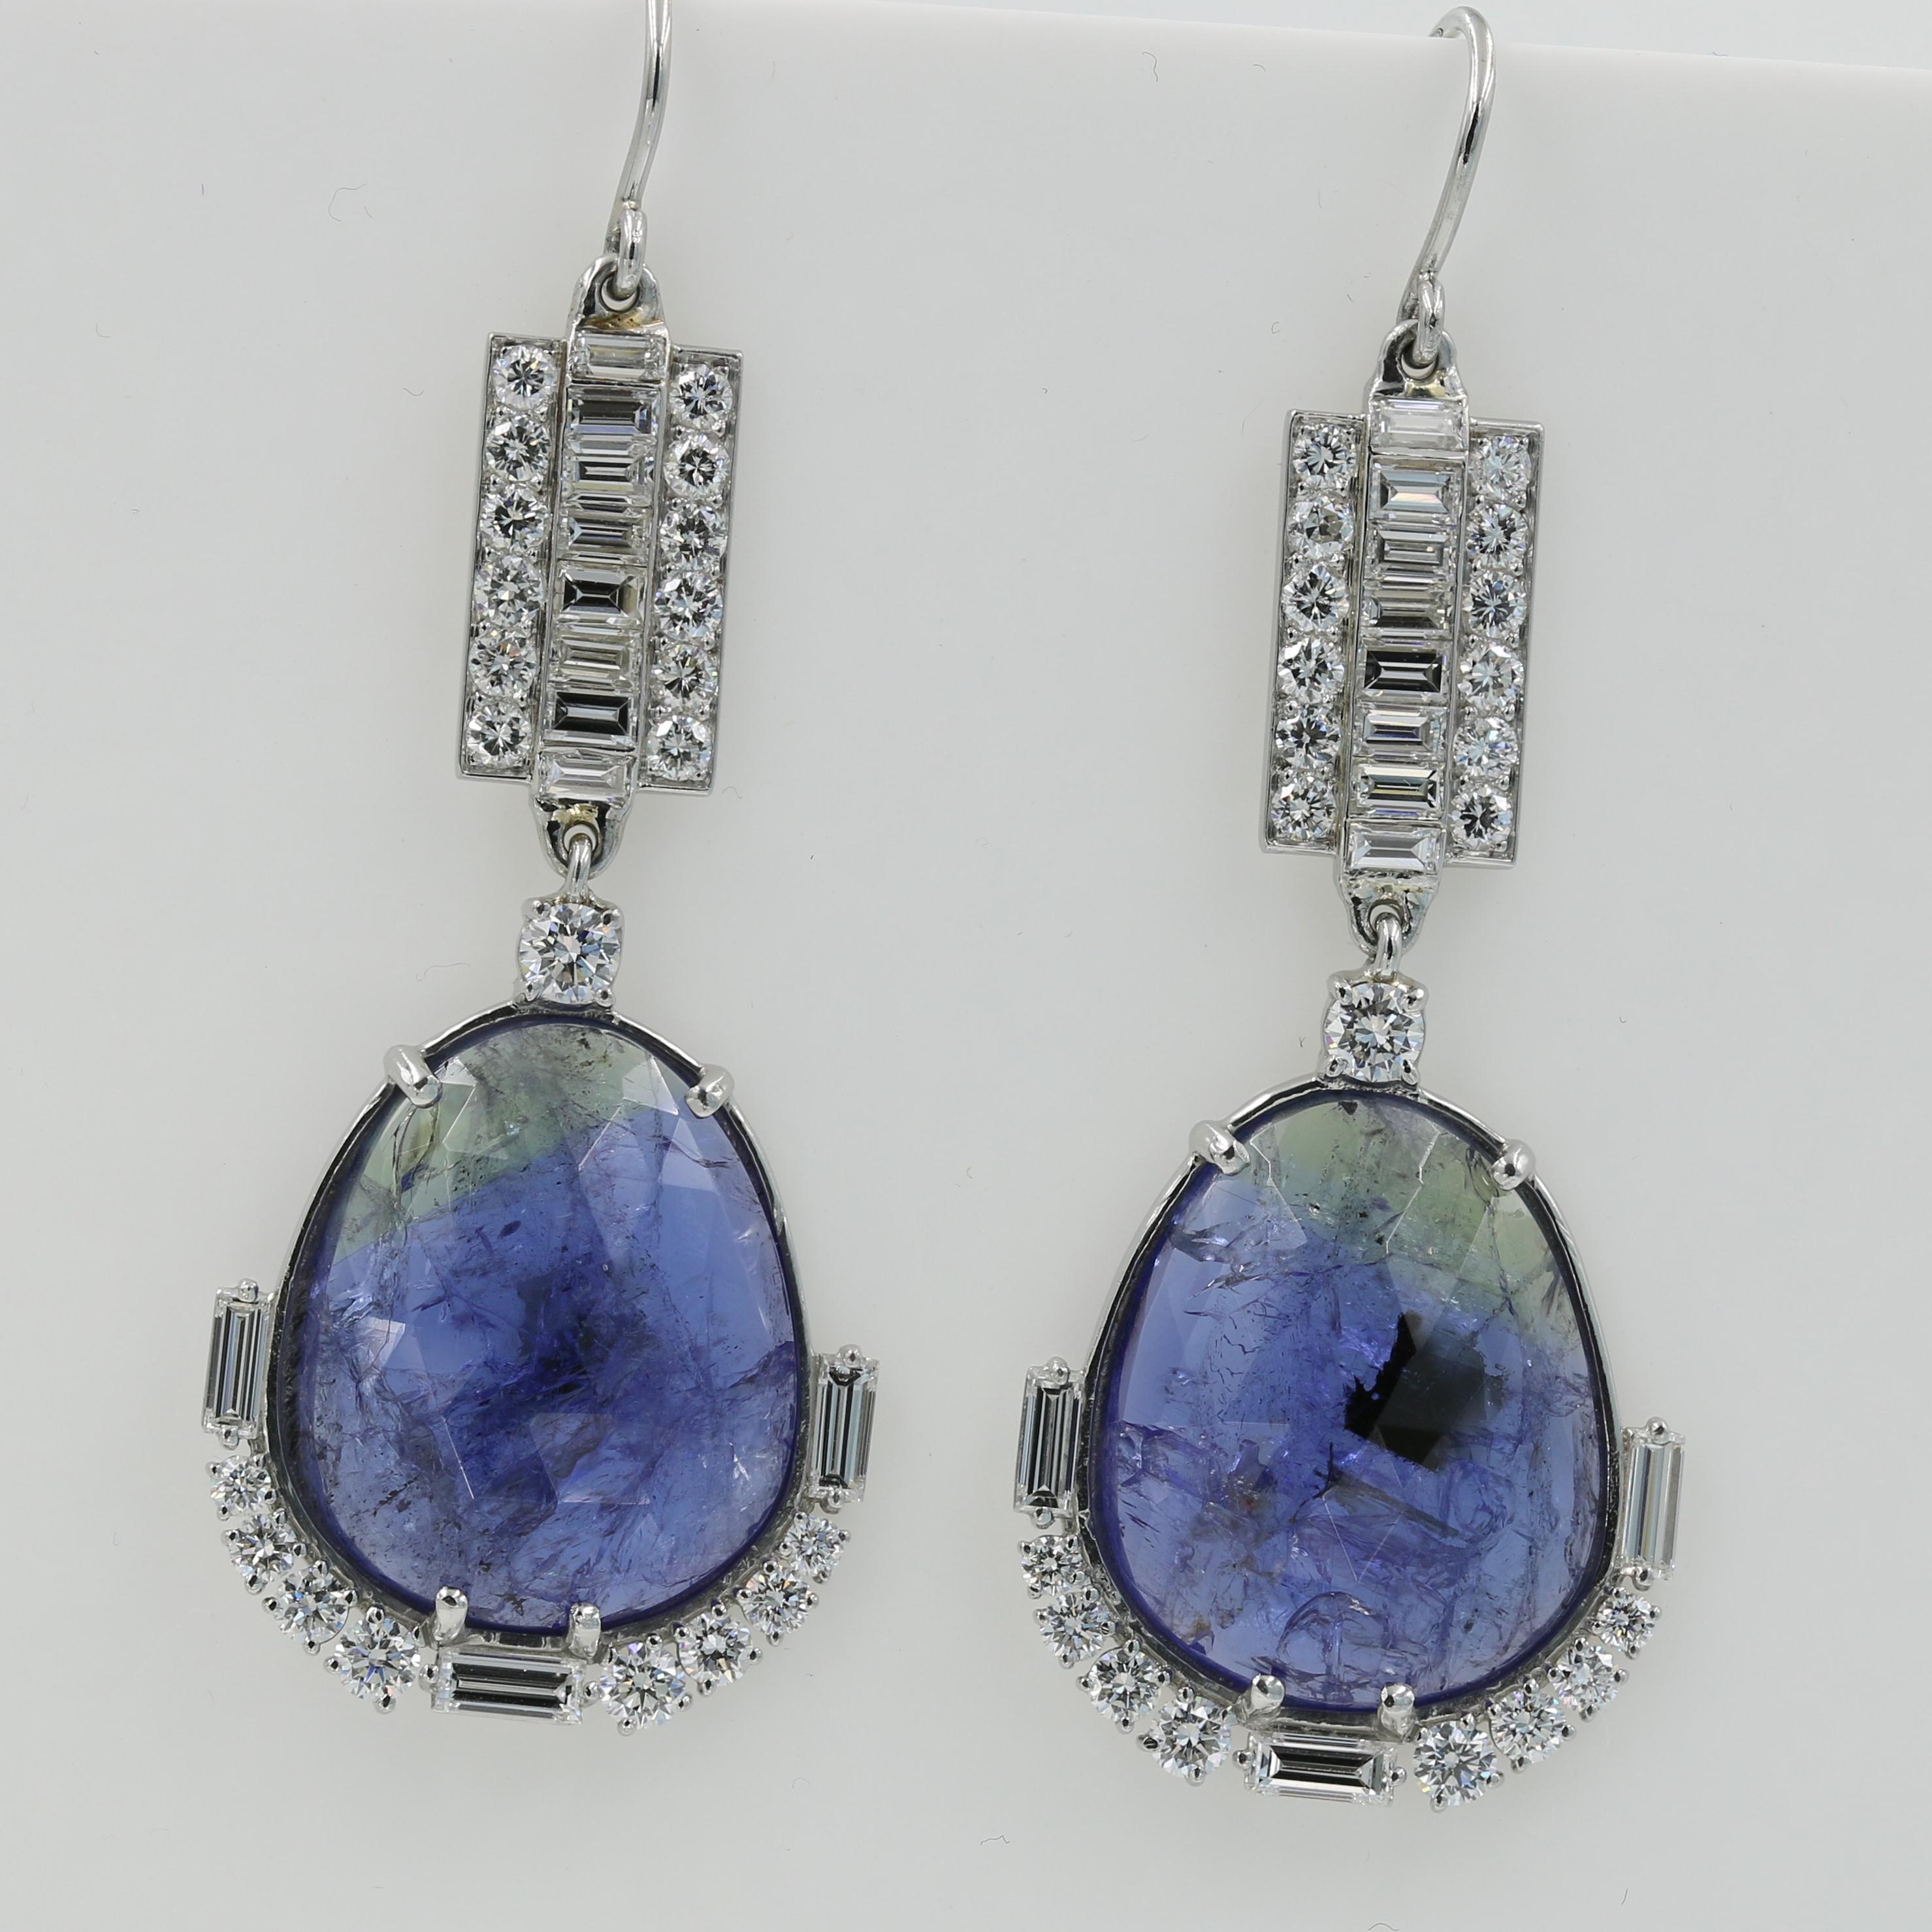 Lester Lampert one-of-a-kind Tanzanite and Diamond Drop Earrings in Platinum - 

Featuring two slice cut Tanzanites weighing 26.56cts. total. The earrings are accented by 18 ideal cut round diamonds =1.20cts. total (G-VS), 24 Round diamonds =